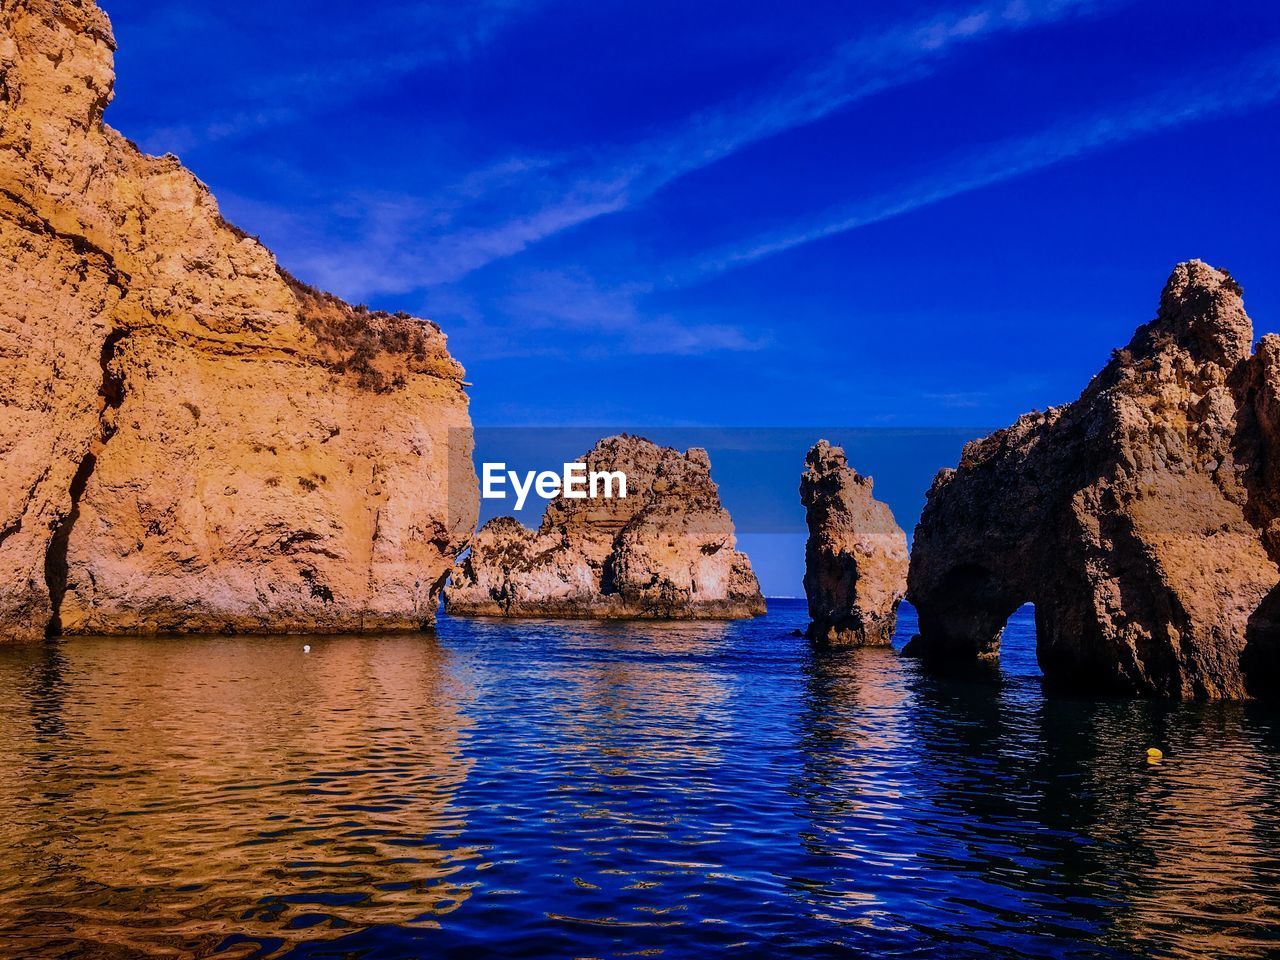 PANORAMIC VIEW OF ROCKS IN SEA AGAINST BLUE SKY